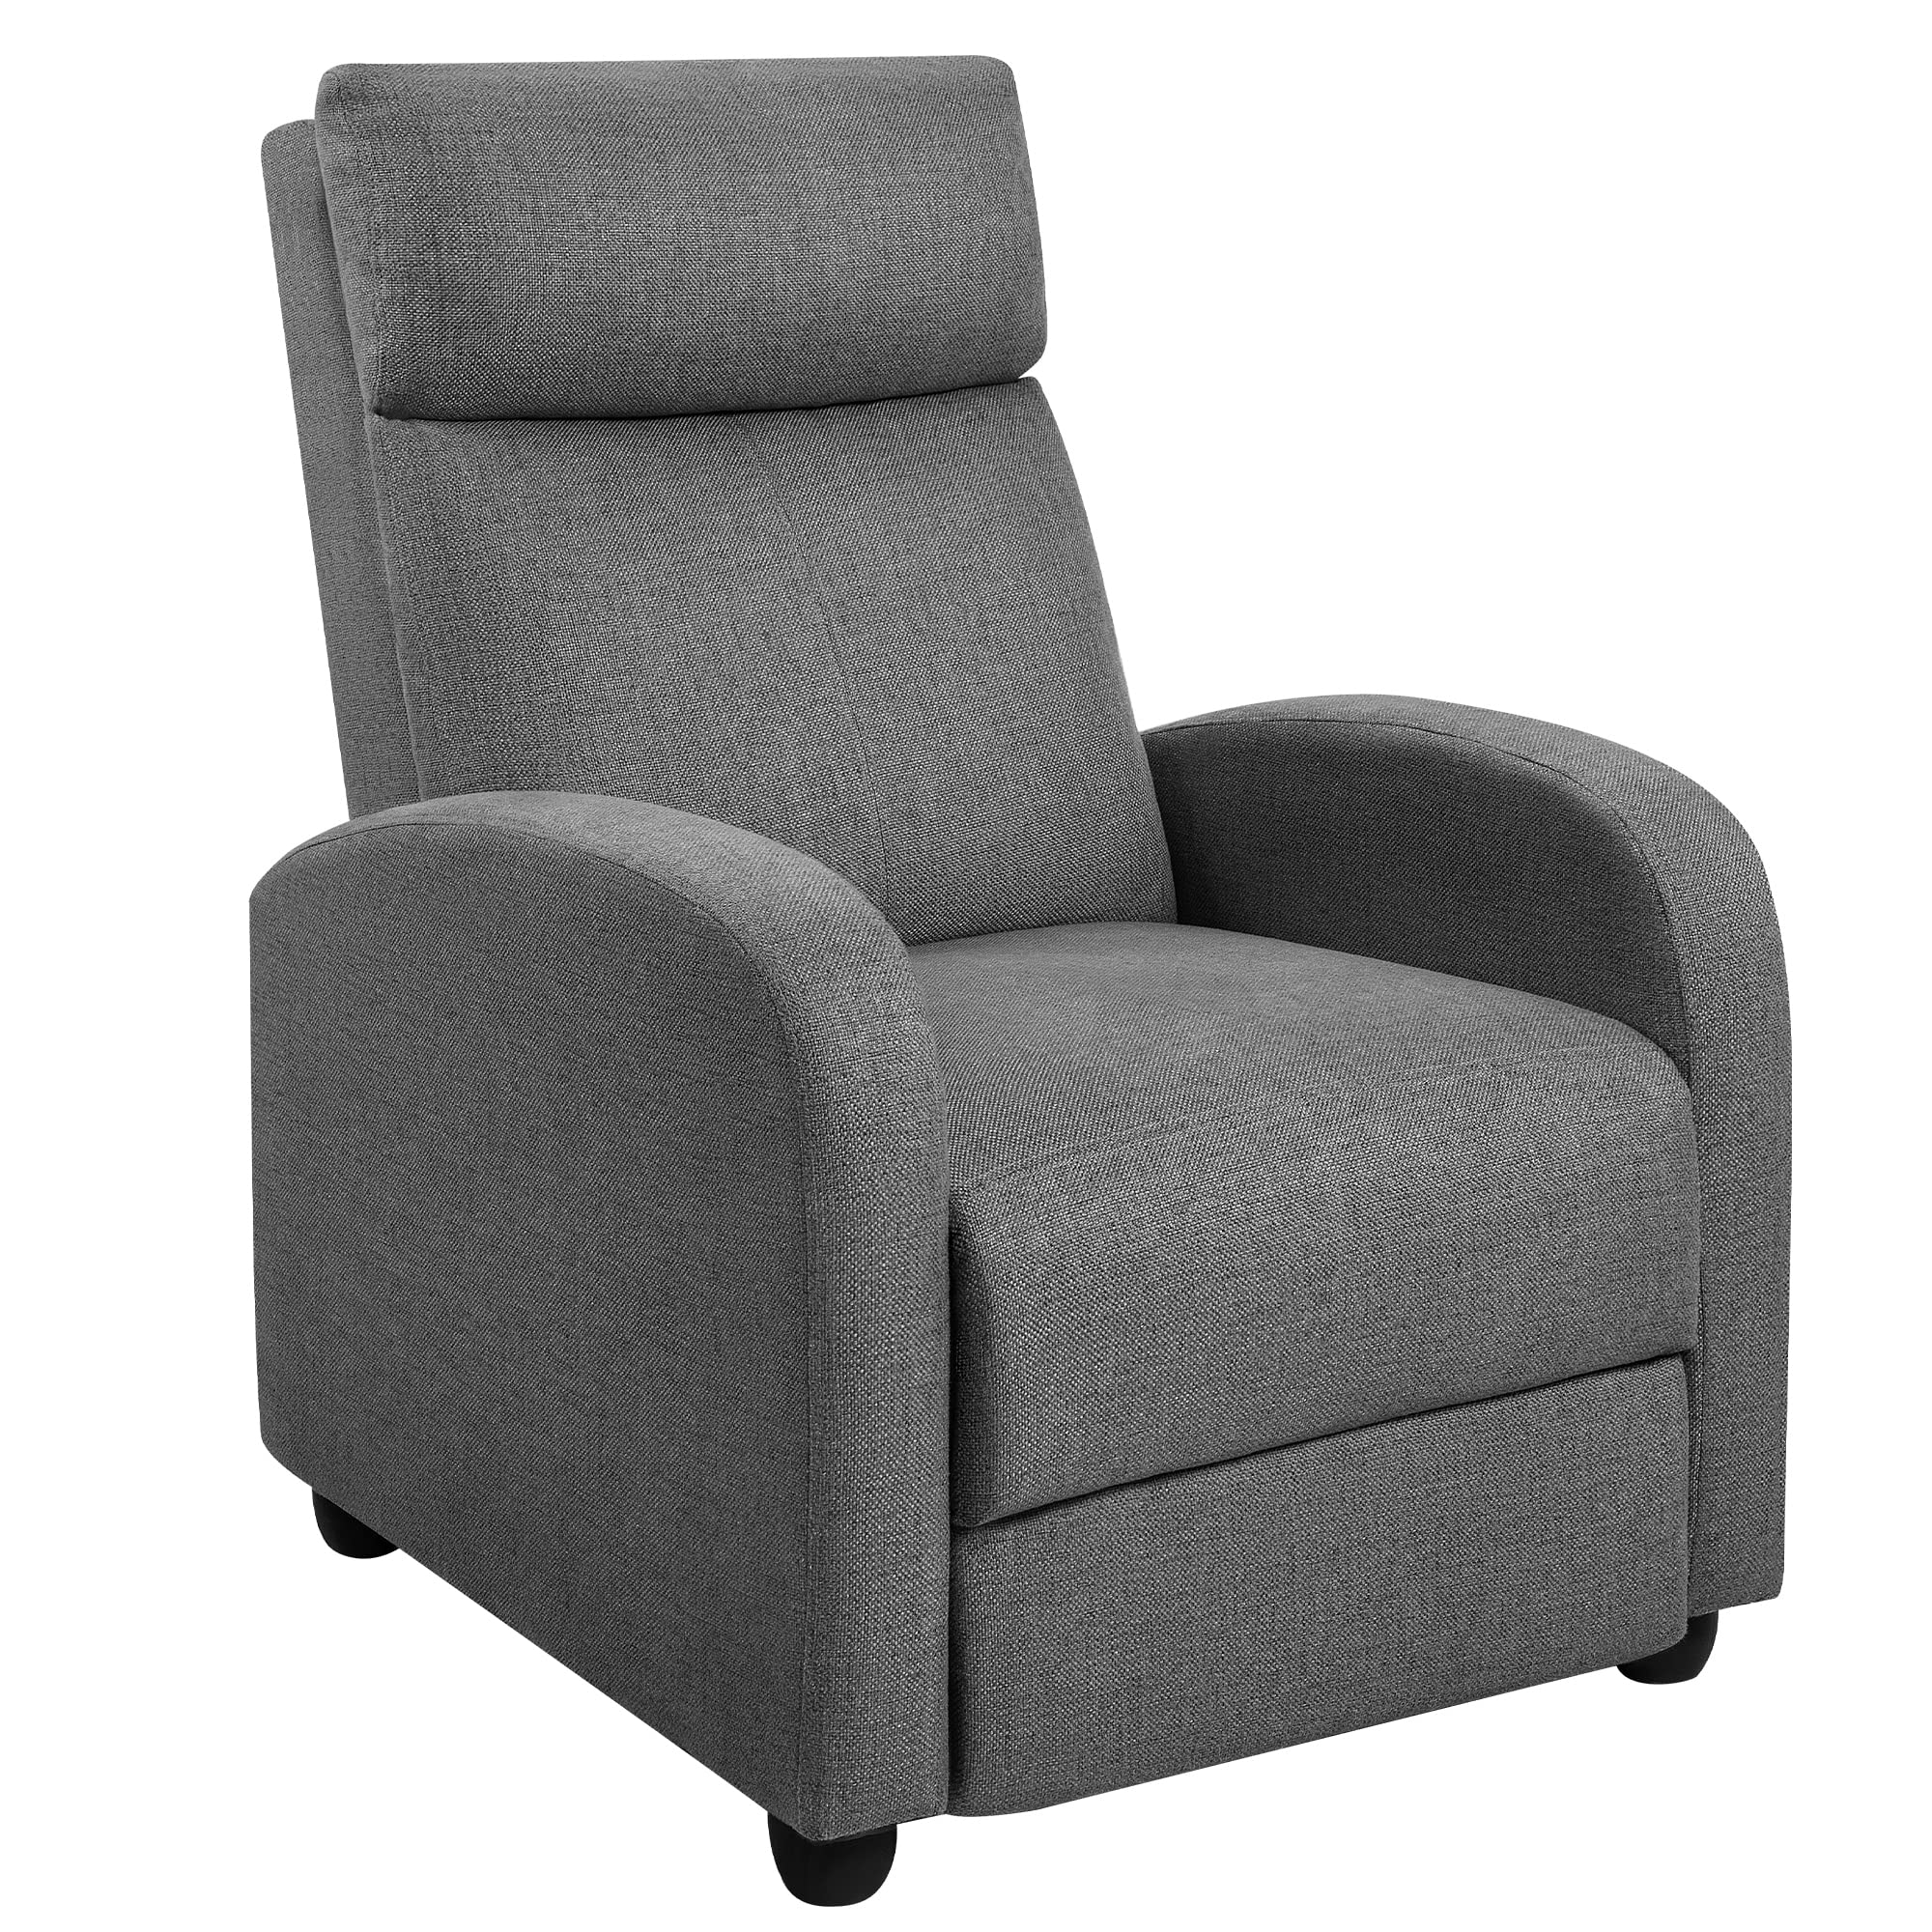 Rankok Recliner chair Ergonomic Adjustable Single Fabric Sofa with Thicker Seat cushion Modern Home Theater Seating for Living R